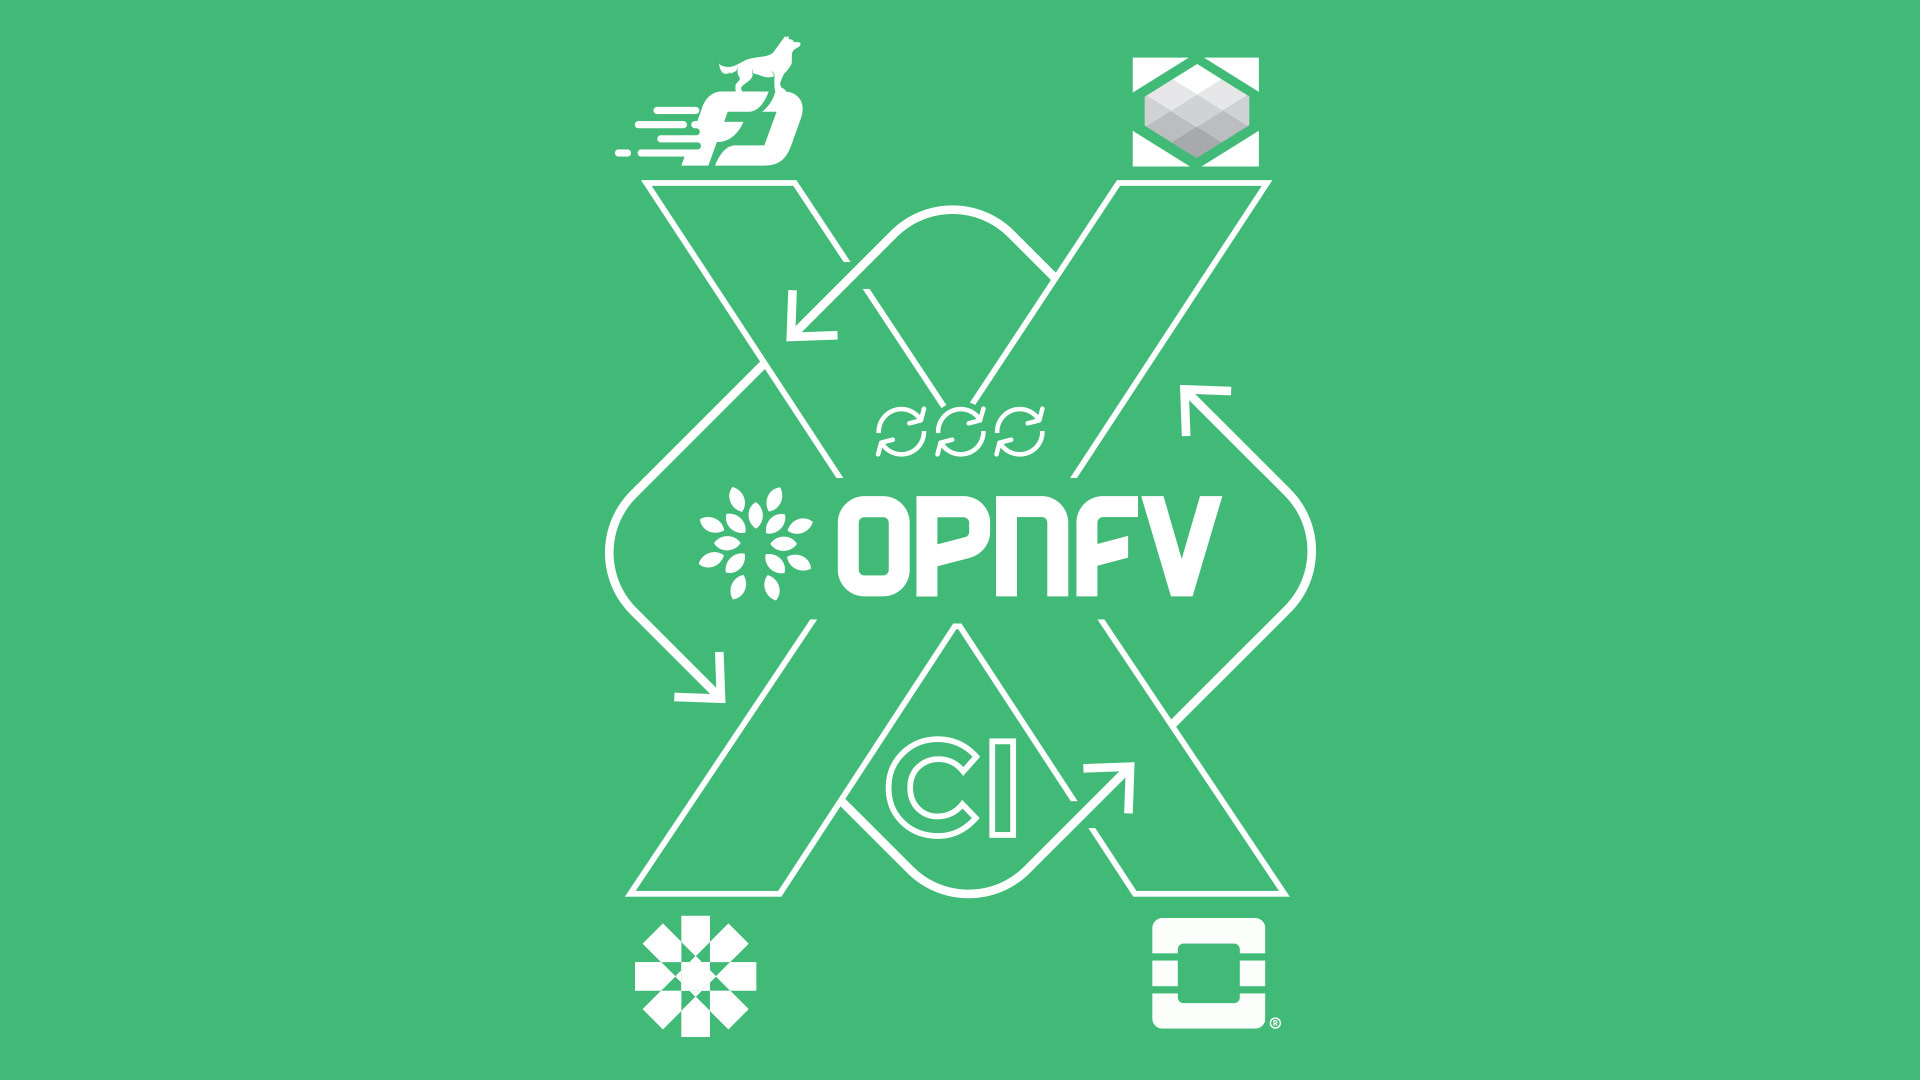 Solution Brief: Cross Community Continuous Integration (XCI) Empowers Innovation by Increasing Collaboration Between OPNFV and Upstream Communities